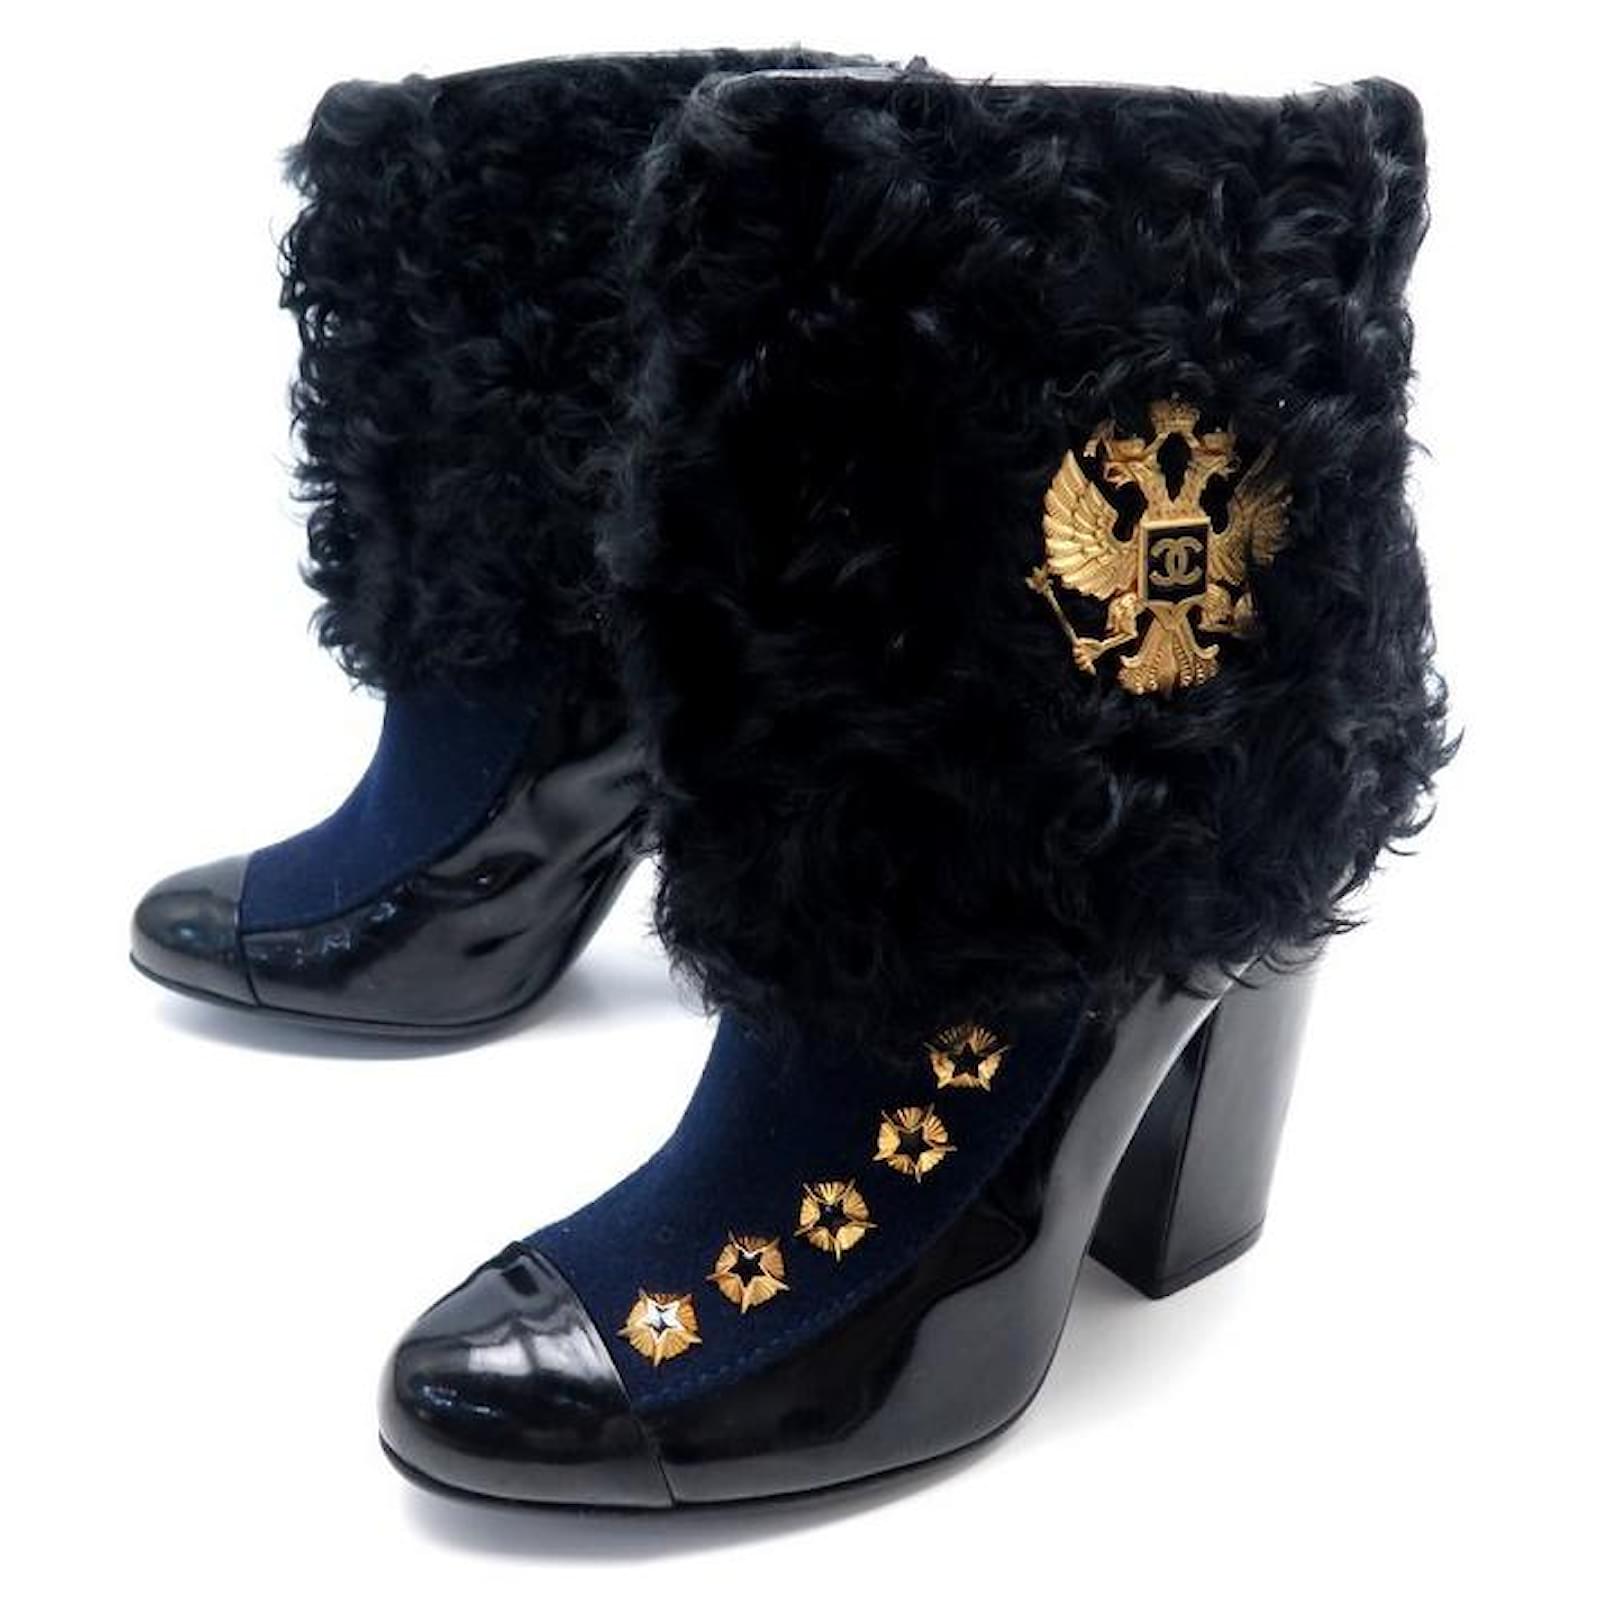 CHANEL, Shoes, Chanel Fur Booties